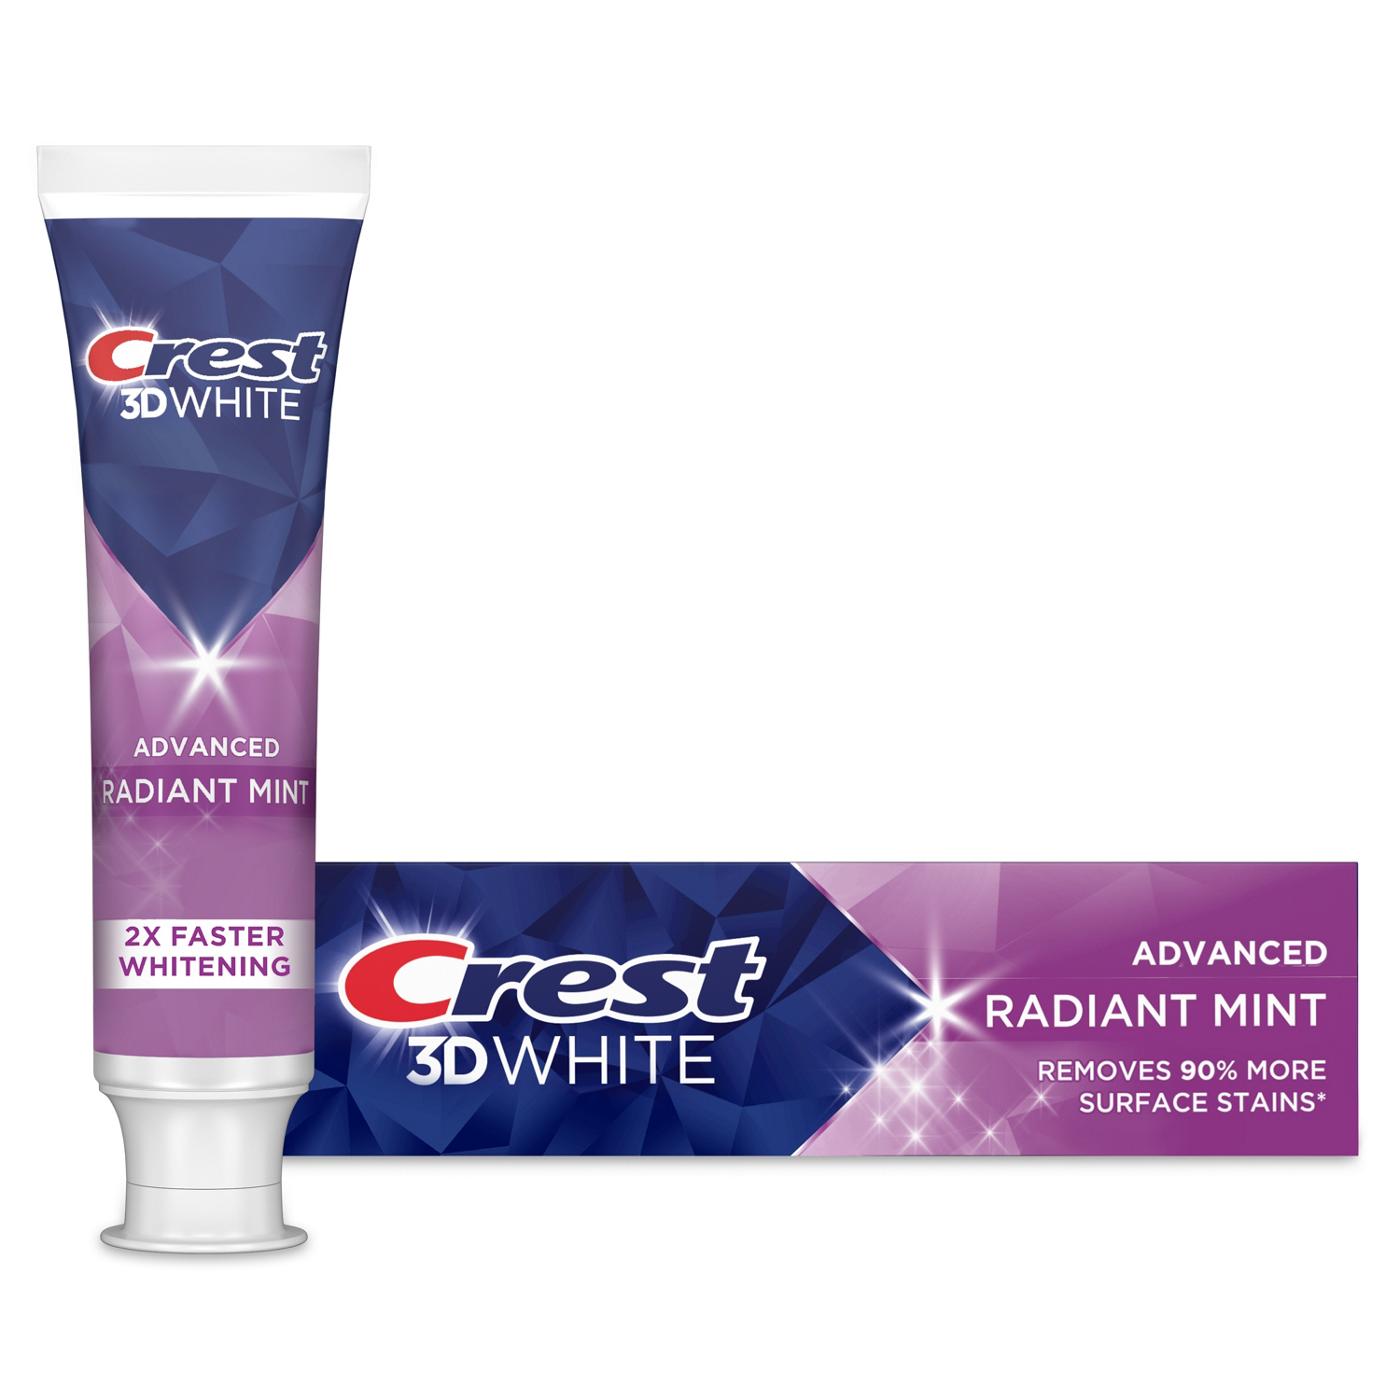 Crest 3D White Whitening Toothpaste - Radiant Mint; image 7 of 8